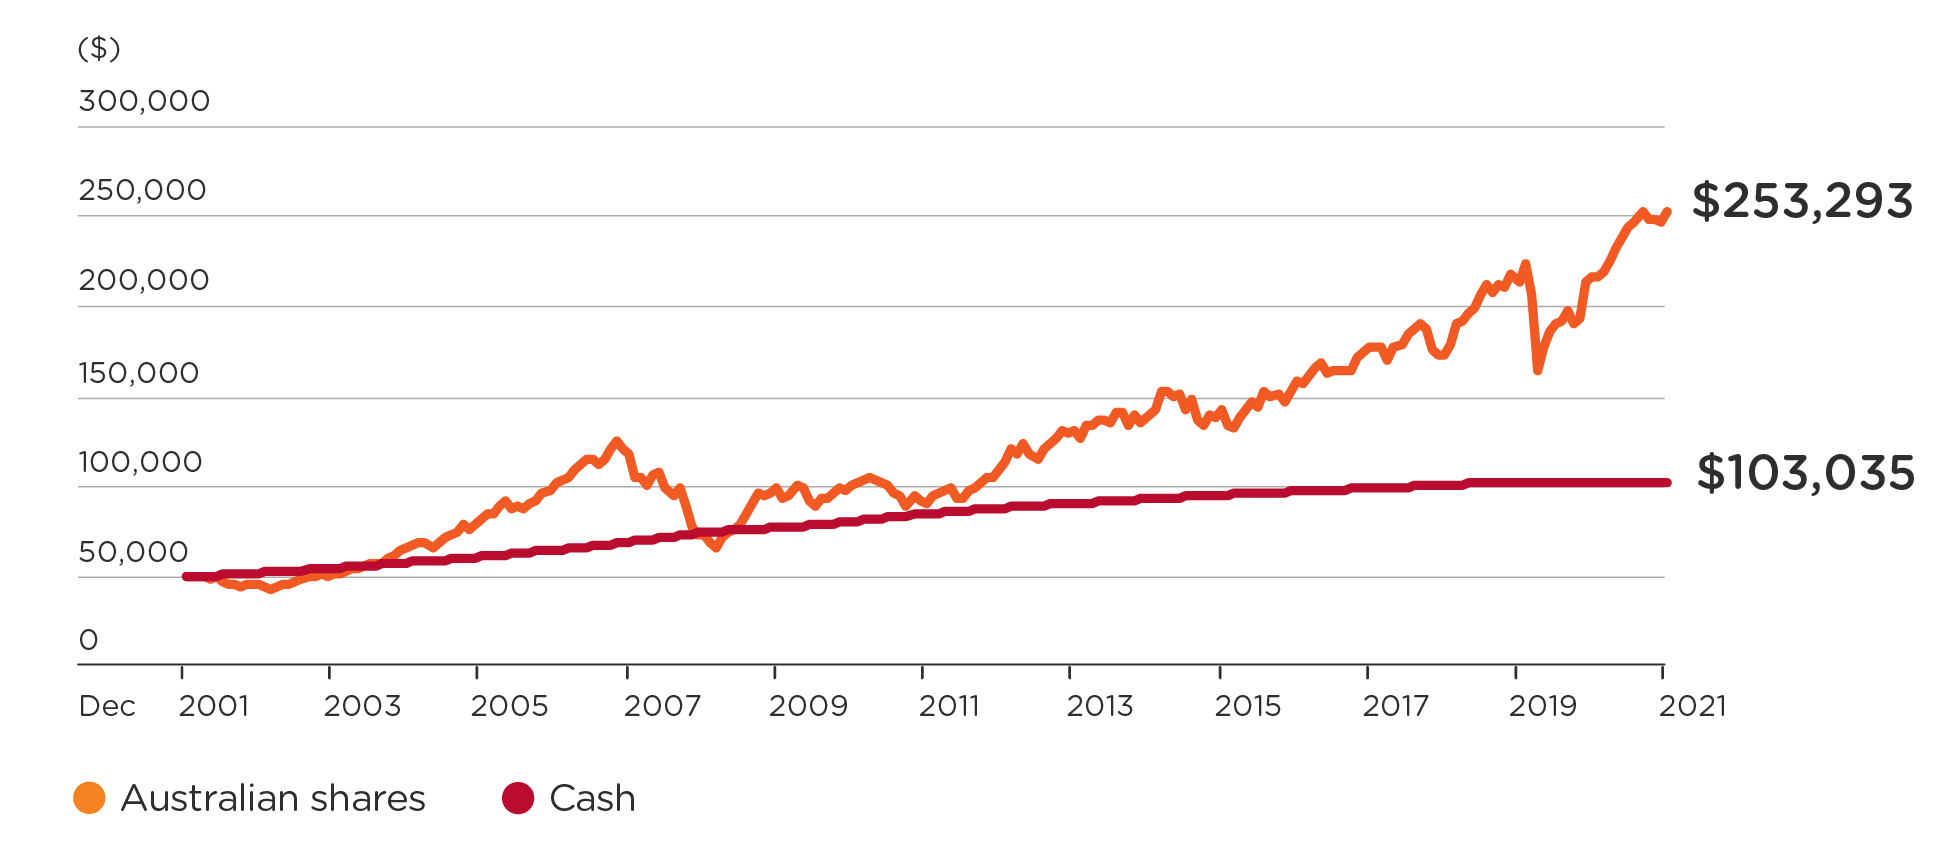 The chart shows that $50,000 invested in Australian Shares (S&P/ASX 200 Index) over the 20 years to 31 December 2021 would have grown to $253,293, while the same investment in Cash (Bloomberg AusBond Bank Bill Index) would have grown to $103,035.